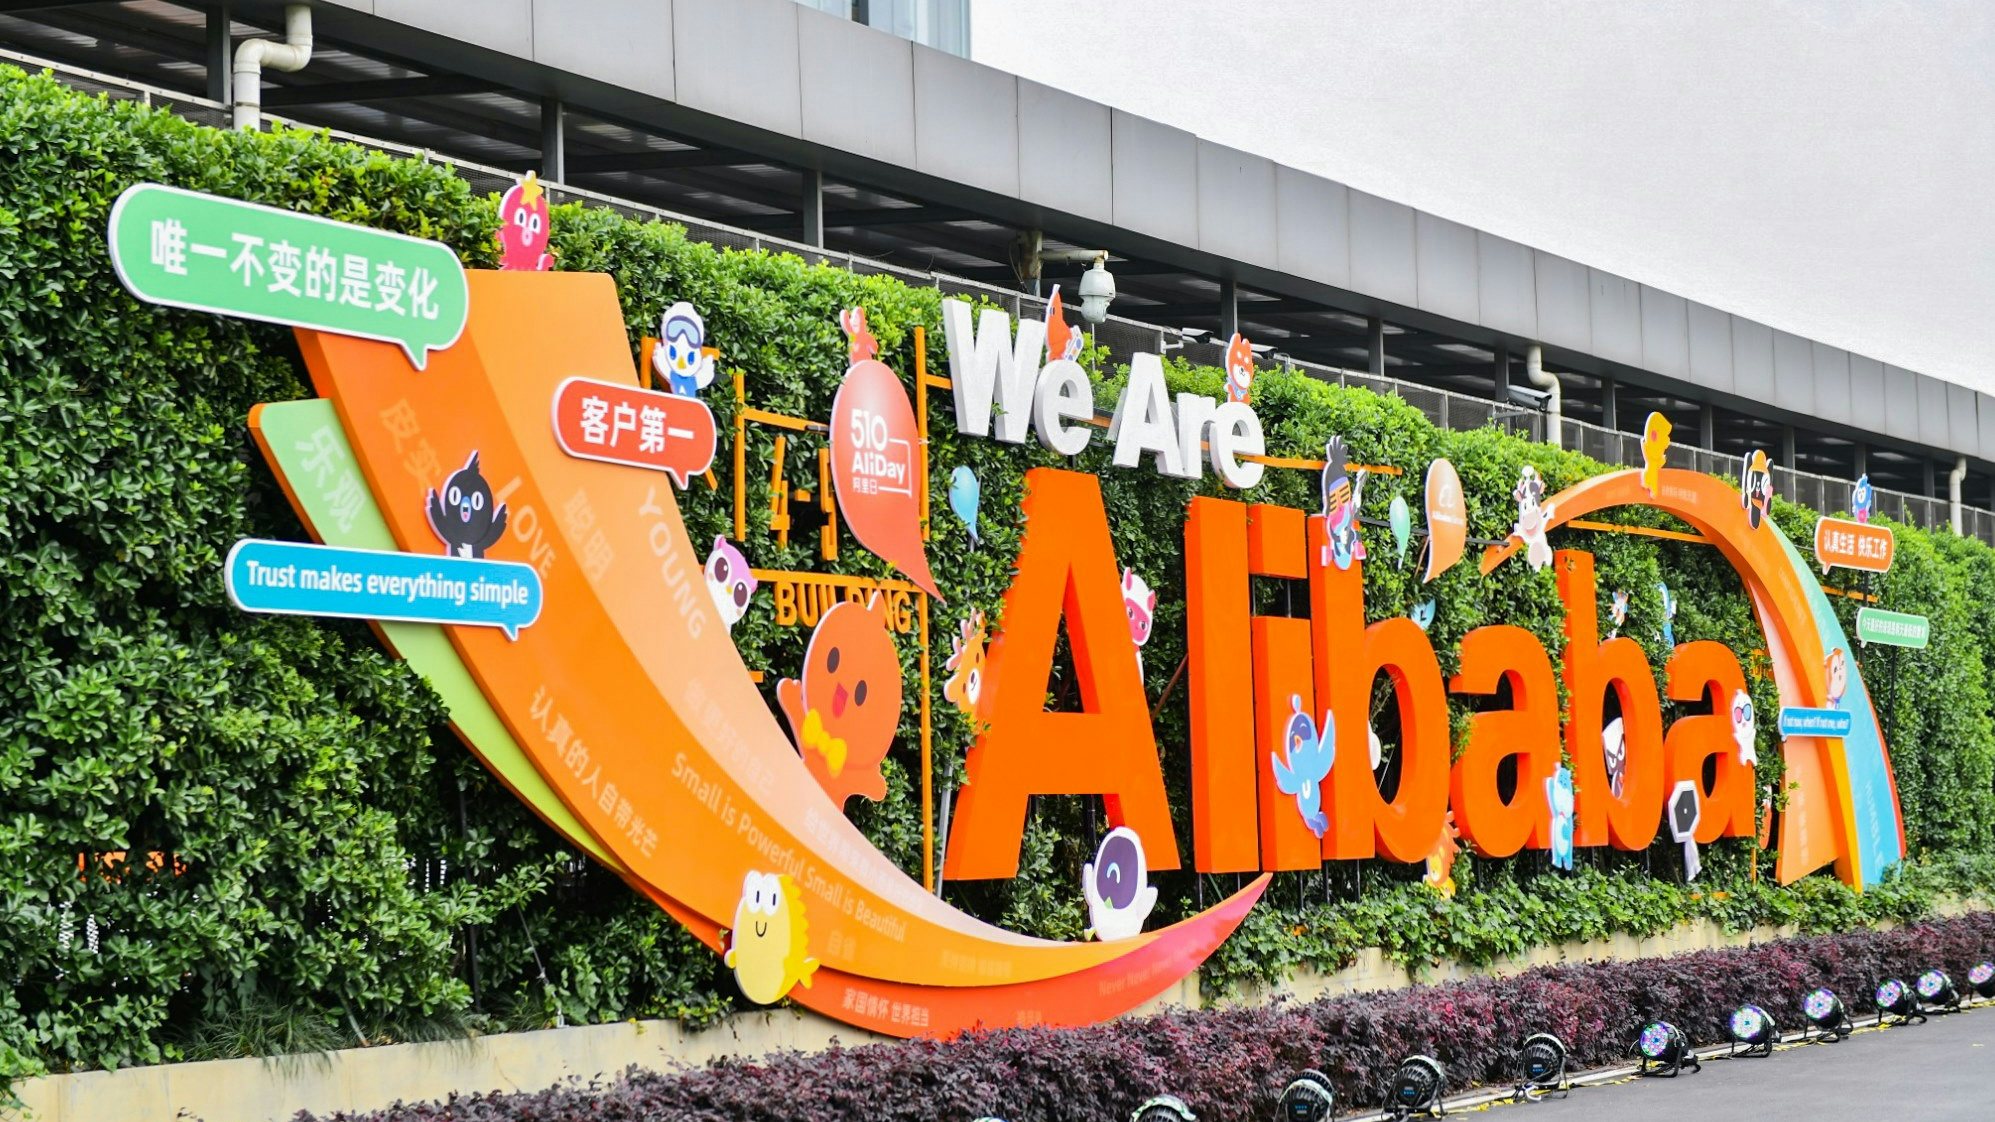 Alibaba’s woes drag on as Beijing continues to clamp down on big tech. This latest move targets the owner of South China Morning Post’s media interests. Photo: Courtesy of Alibaba Group